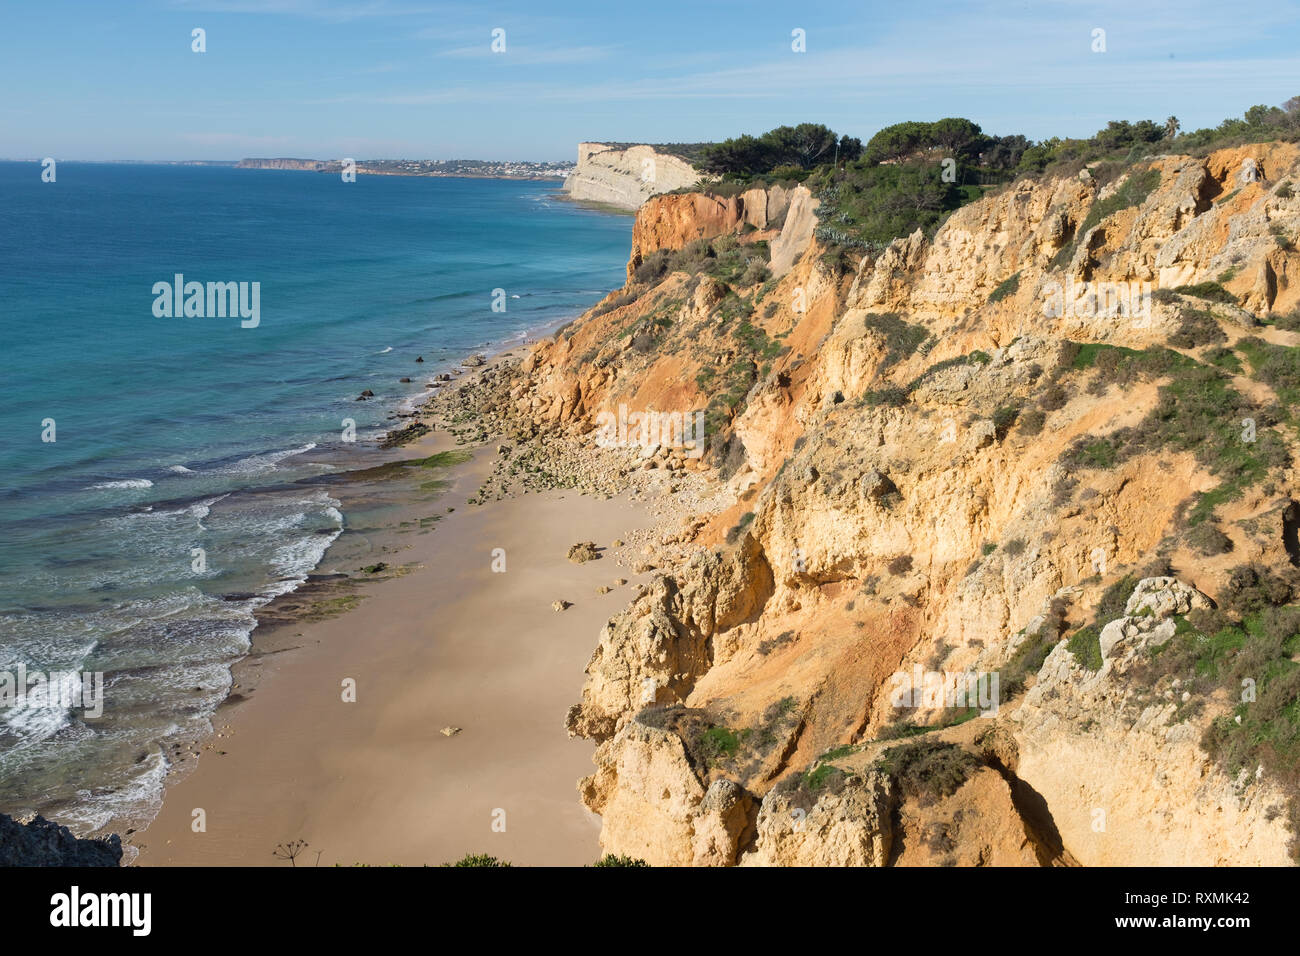 Beach during low tide in Lagos, Algarve, Portugal Stock Photo